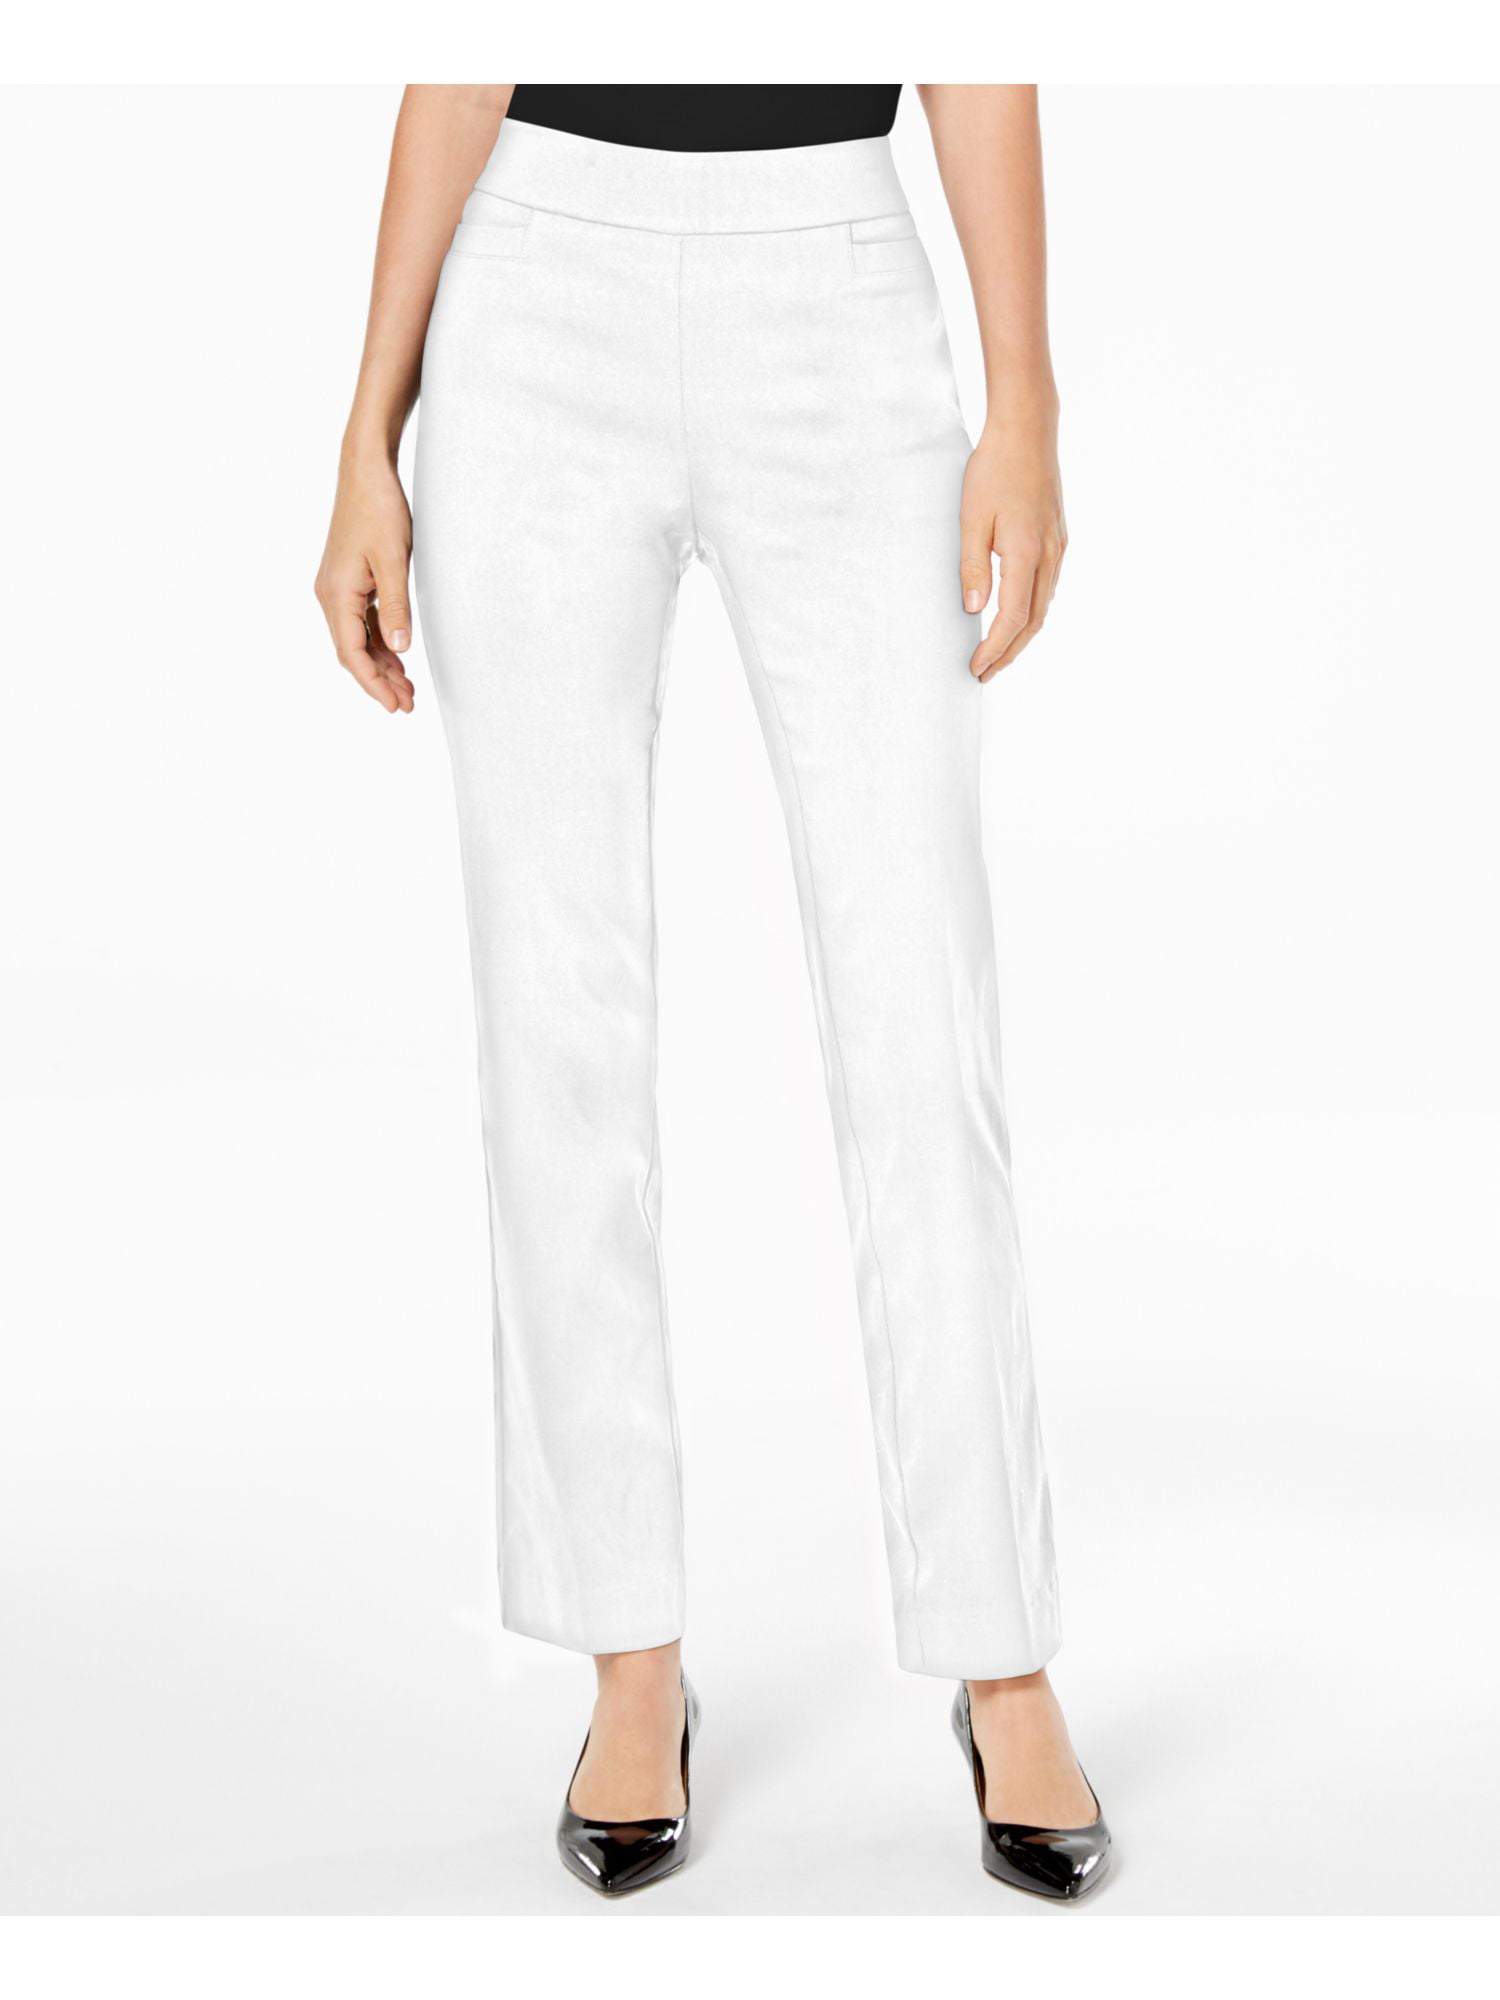 JM Collection - JM COLLECTION Womens White Pocketed Formal Pants Size S ...